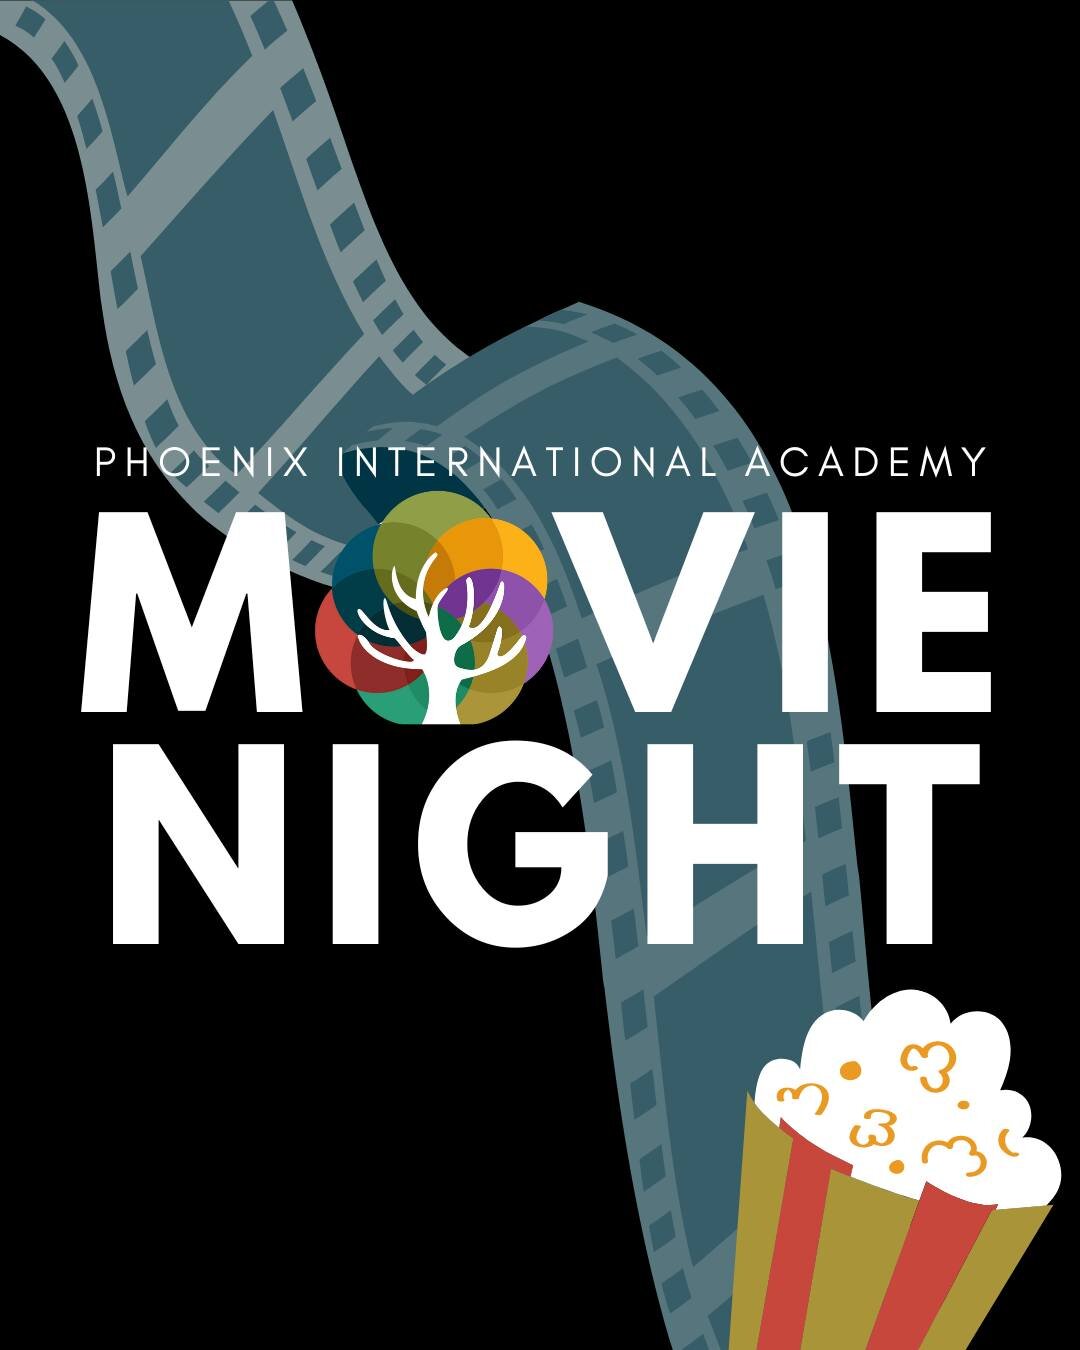 Join us for a movie night at PIA! Bring some blankets, pillows, and/or chairs and enjoy a movie with family and friends! Doors open at 4:30pm and movie will begin by 5:00pm.

Our 8th graders will be selling concessions to benefit their 8th Grade Fiel